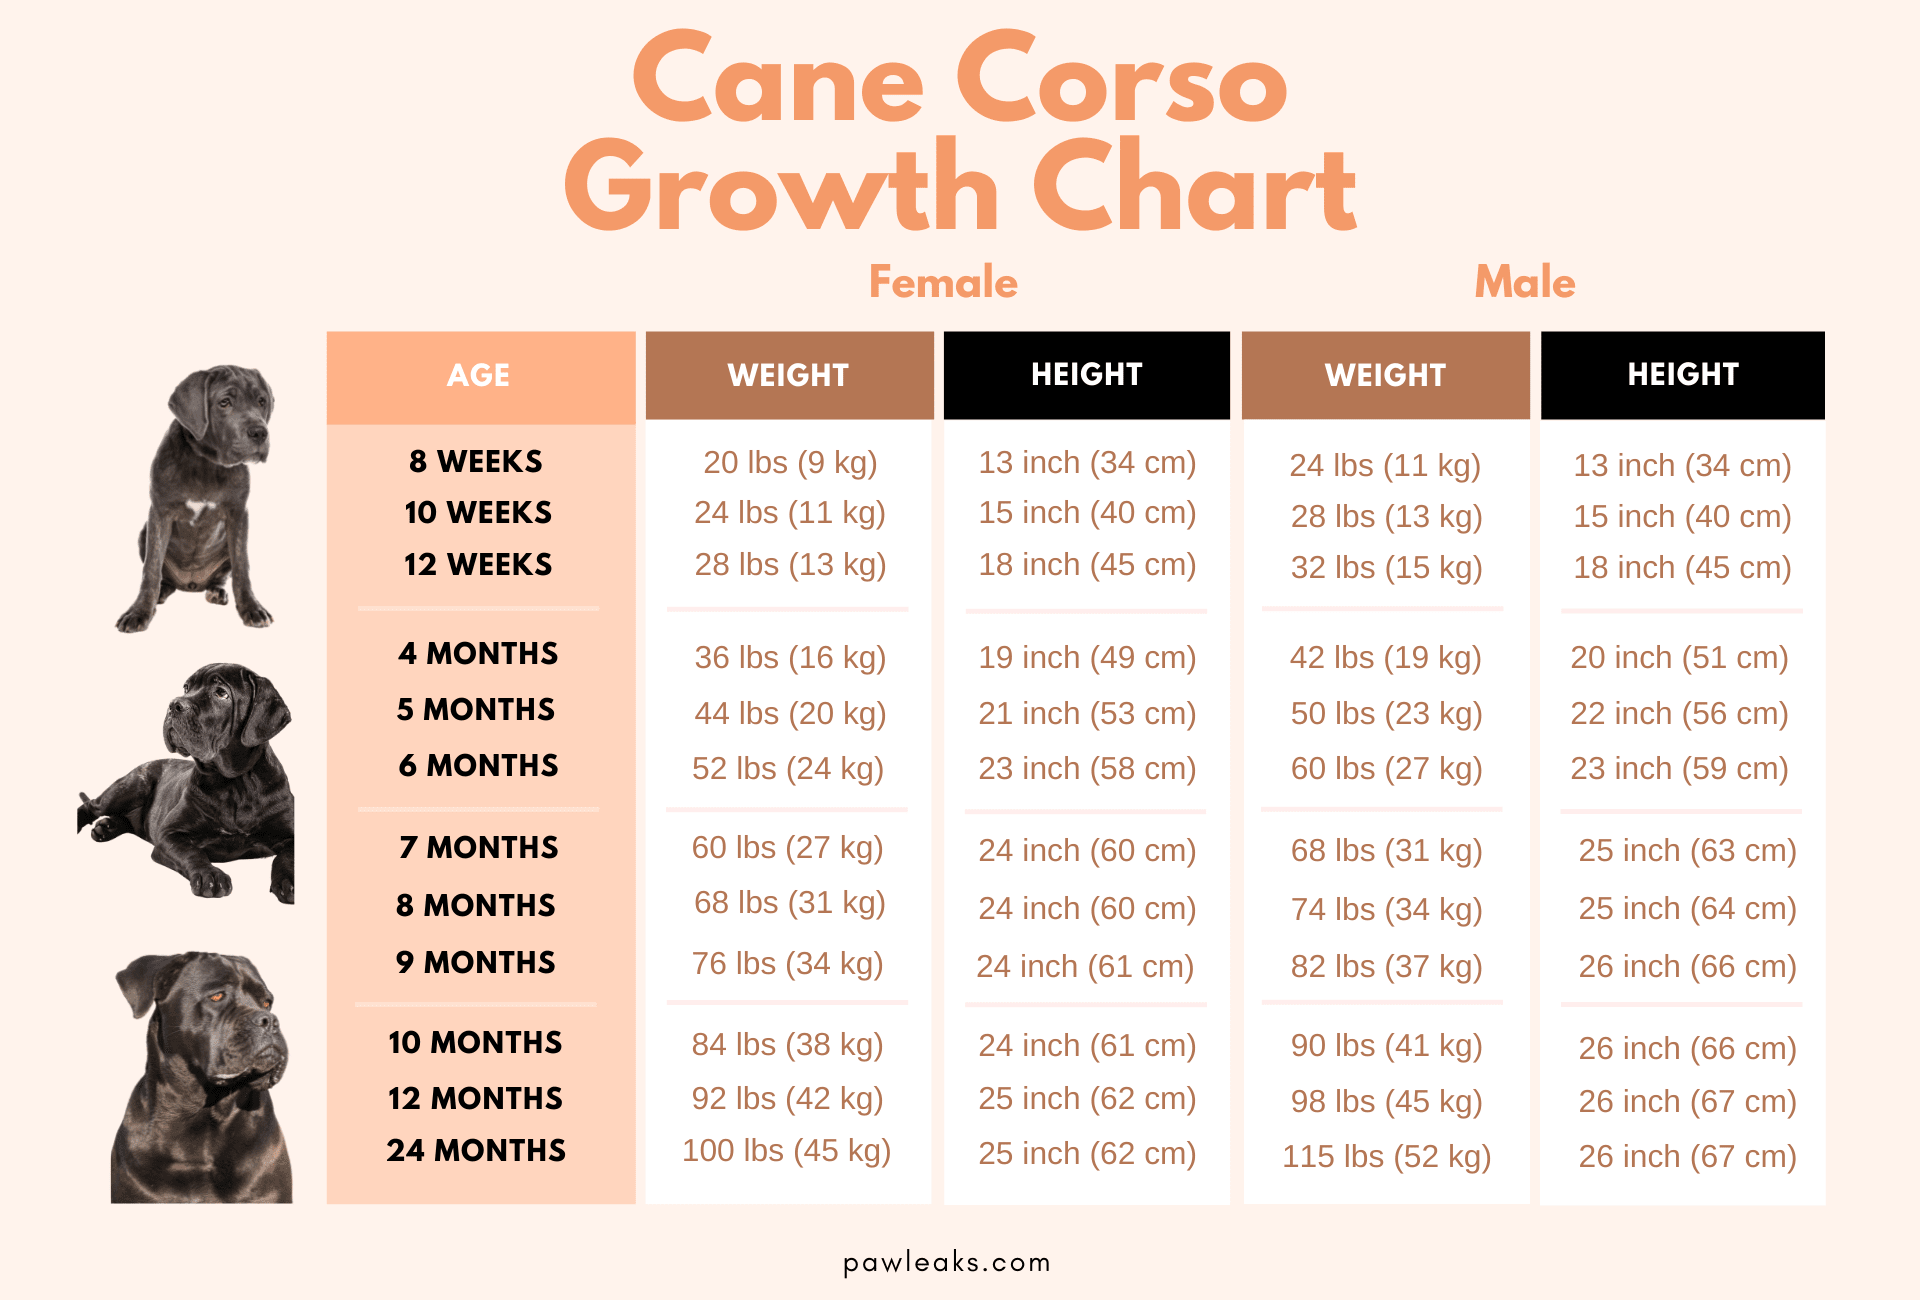 Cane Corso growth chart depicting their weight and height sorted by male and female as well as their age ranging from 8 weeks to 2 years of age.